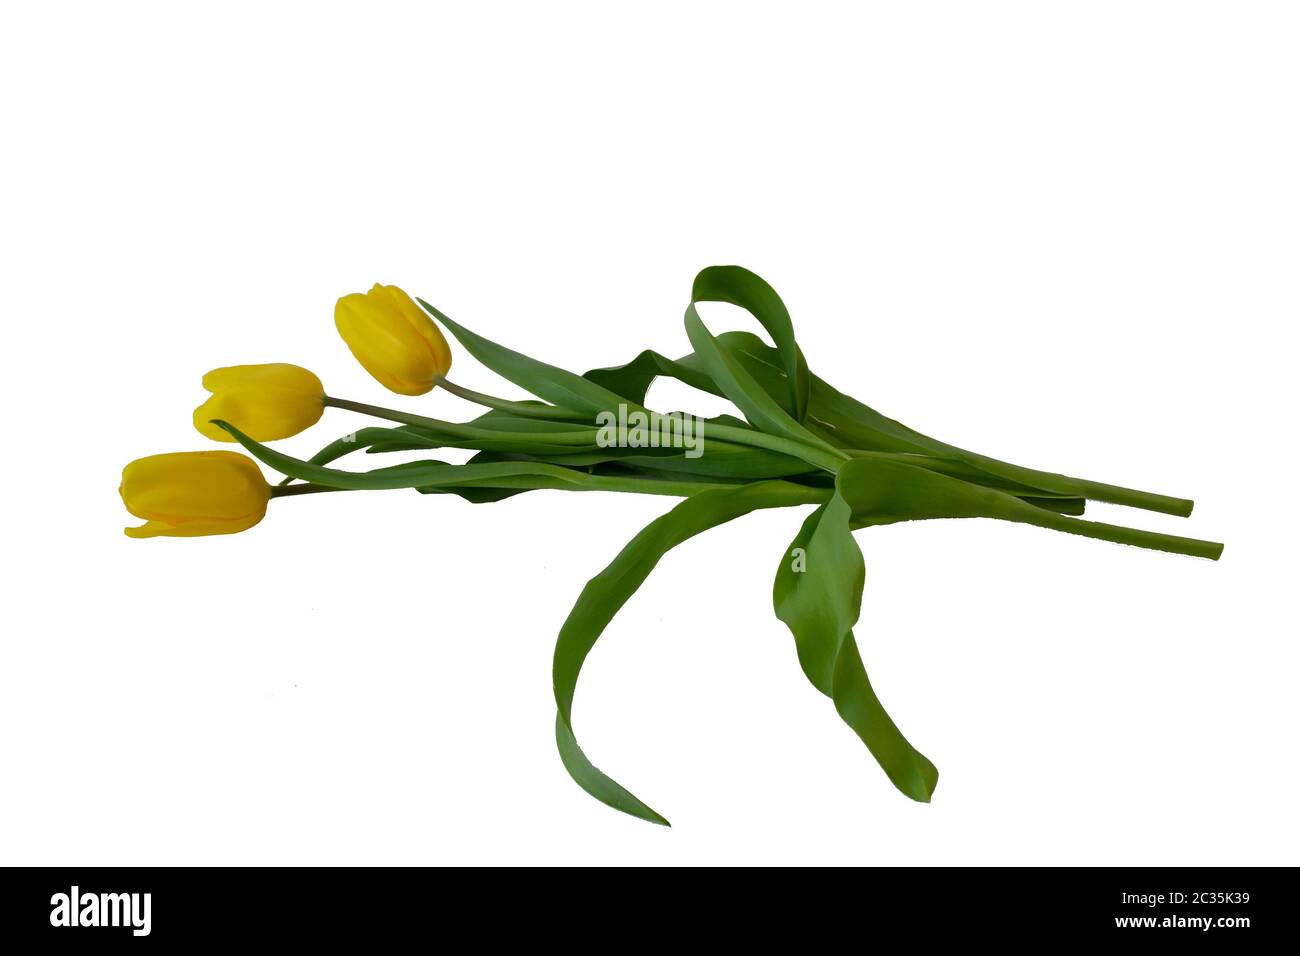 Tulip flower on a white background, isolate, cu Stock Photo